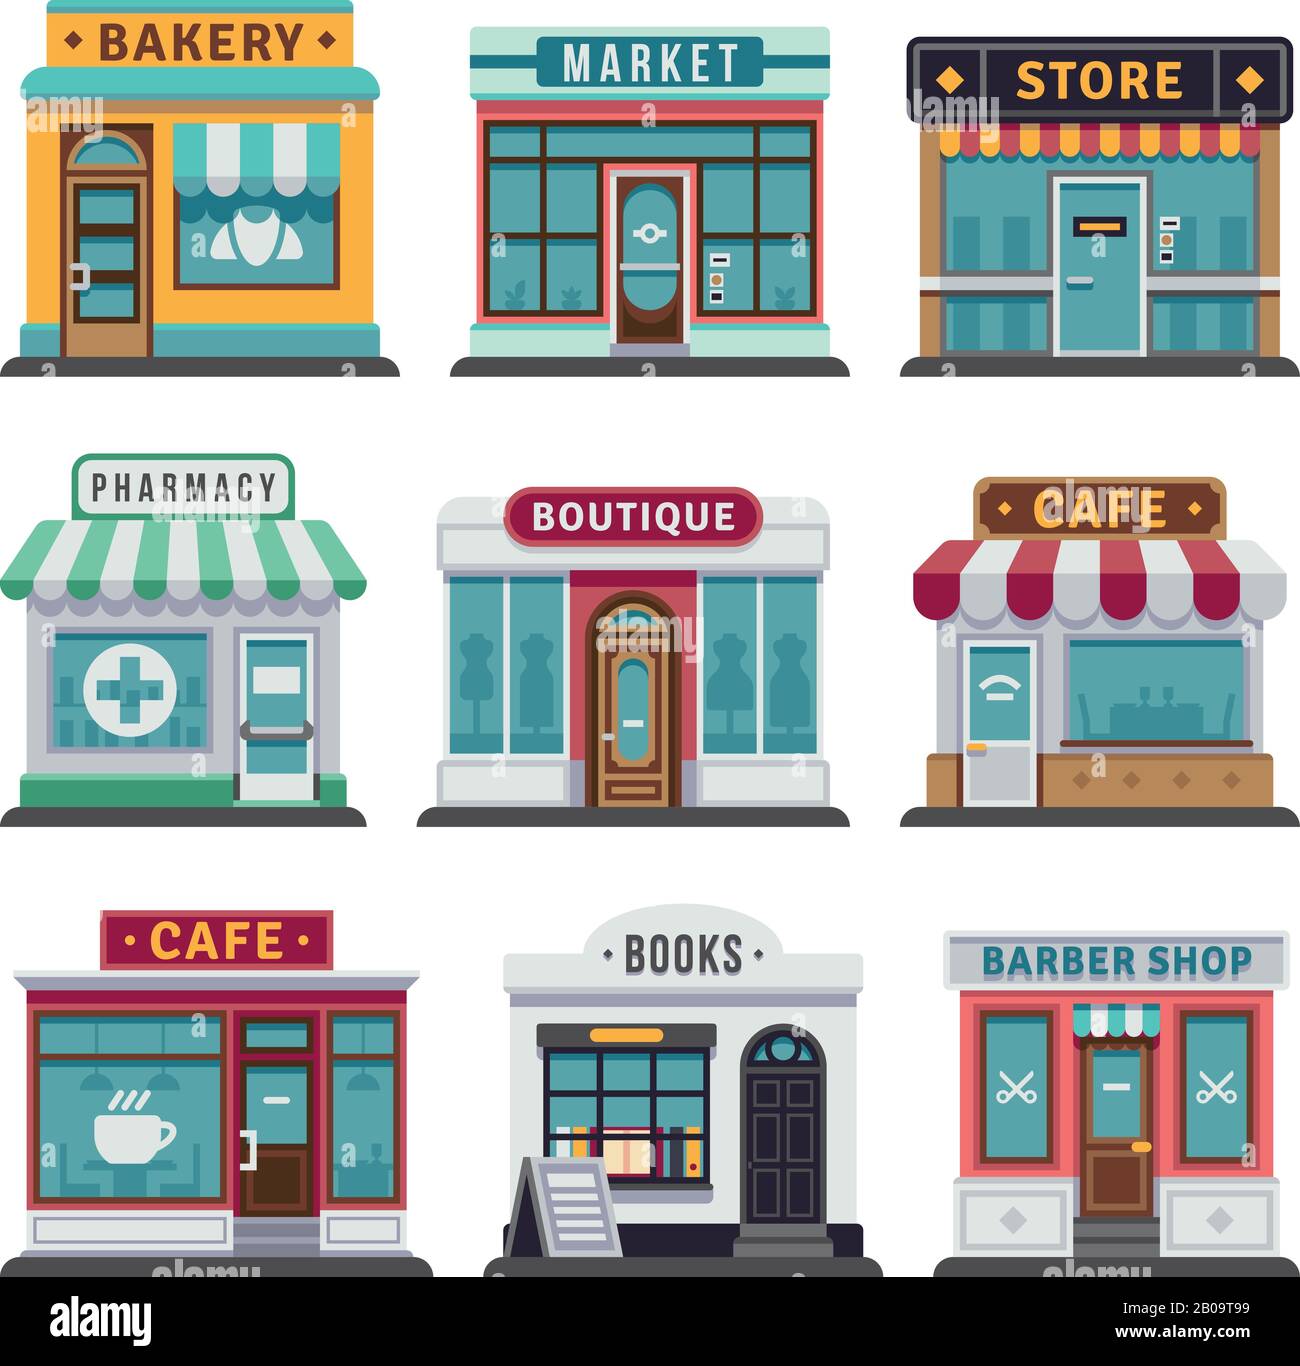 Retail business urban shop, store. Market and bakery, cafe and boutique store, vecto barber shop illustration Stock Vector